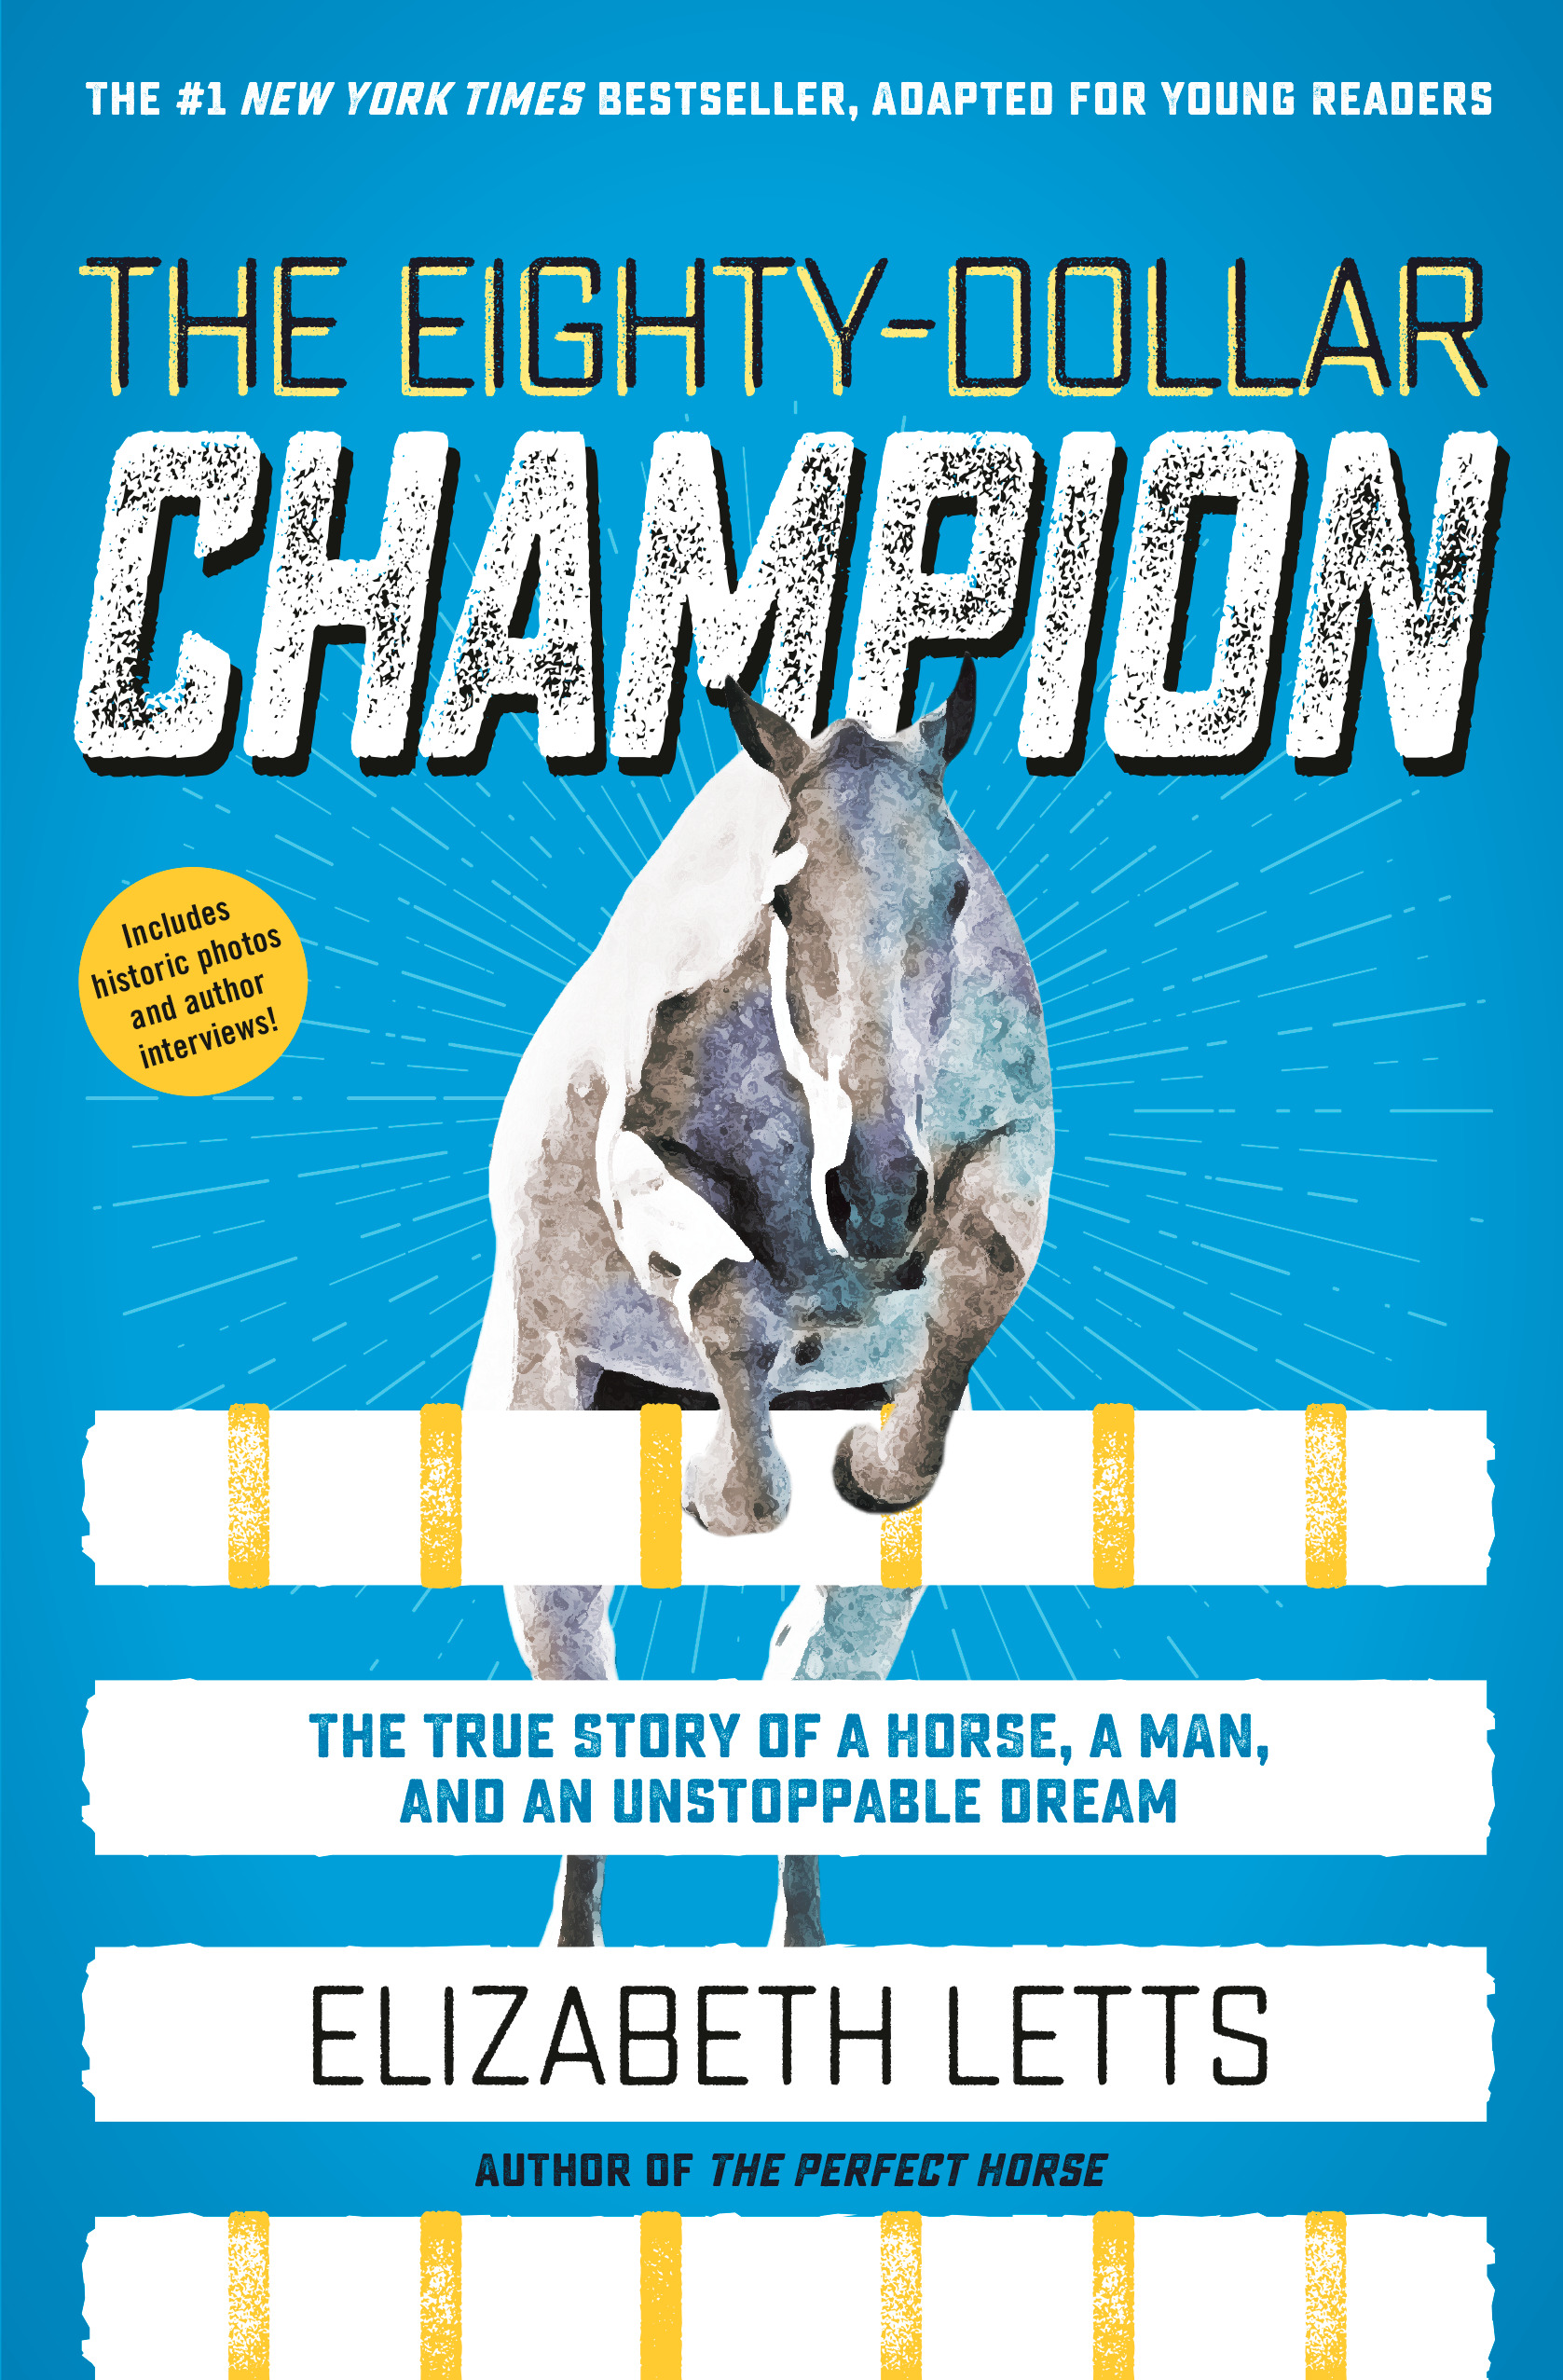 The Eighty-Dollar Champion (Adapted for Young Readers) : The True Story of a Horse, a Man, and an Unstoppable Dream | 9-12 years old